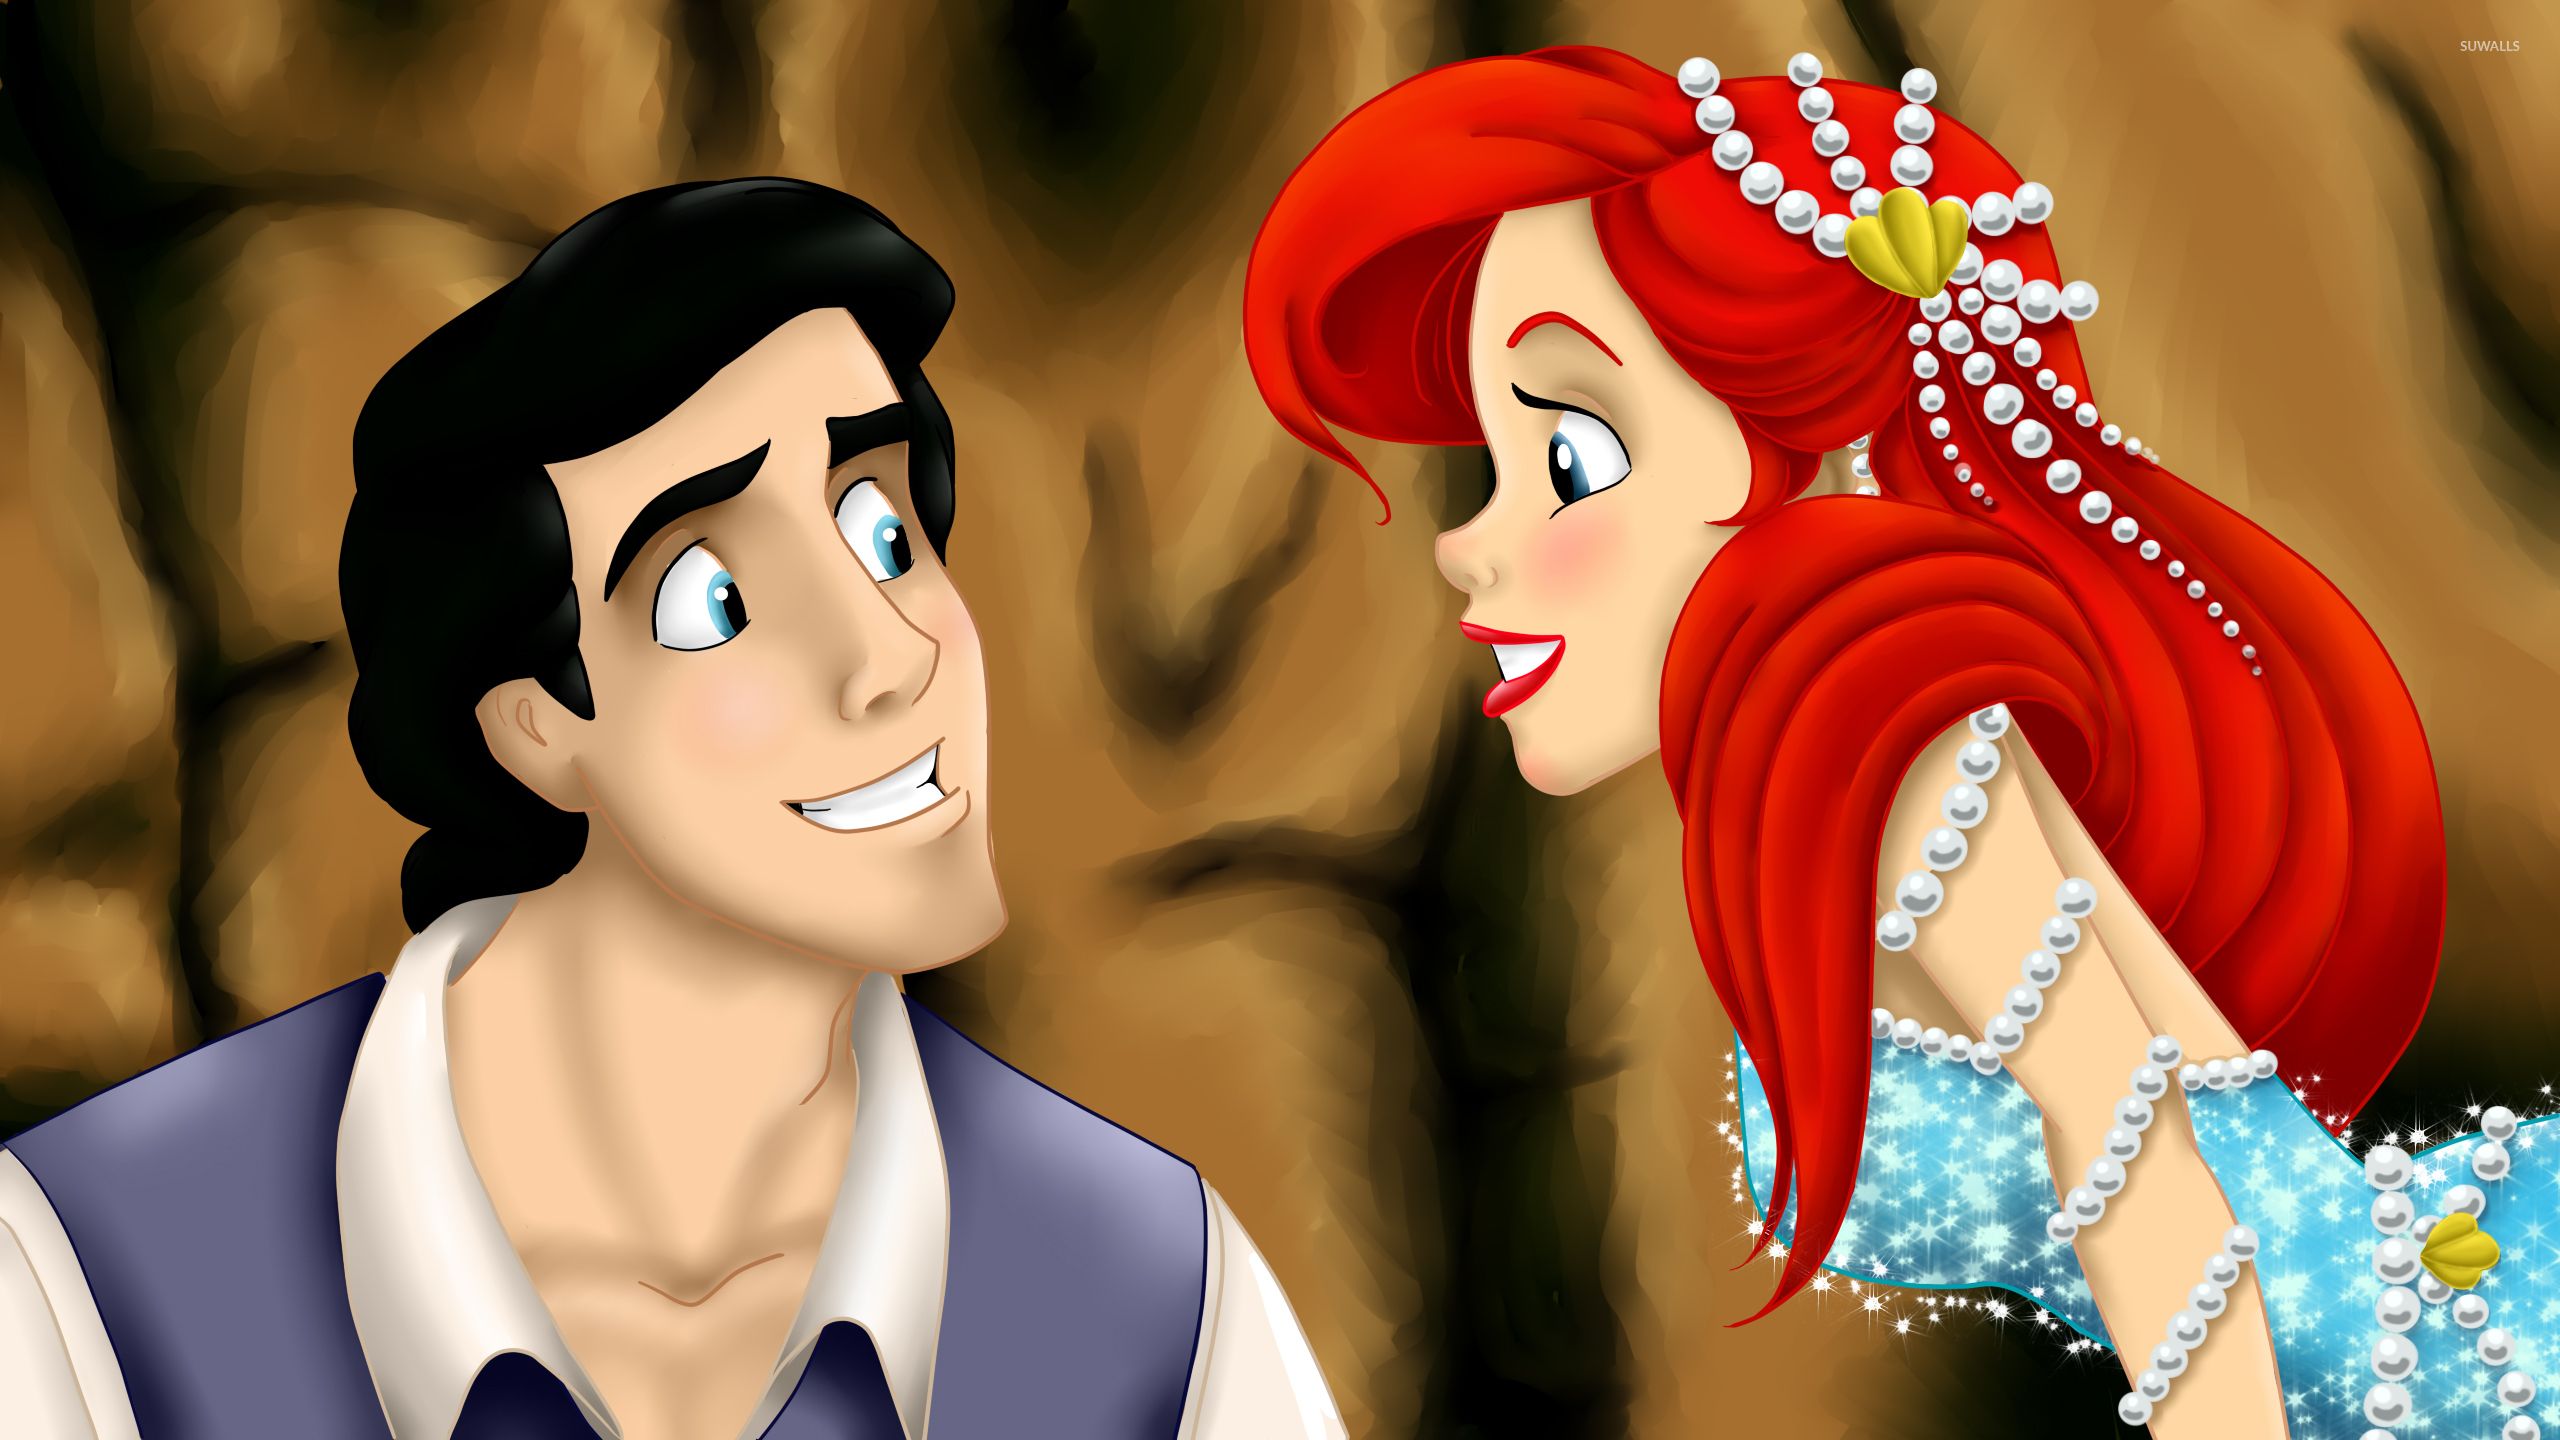 Eric and Ariel from The Little Mermaid wallpaper wallpaper